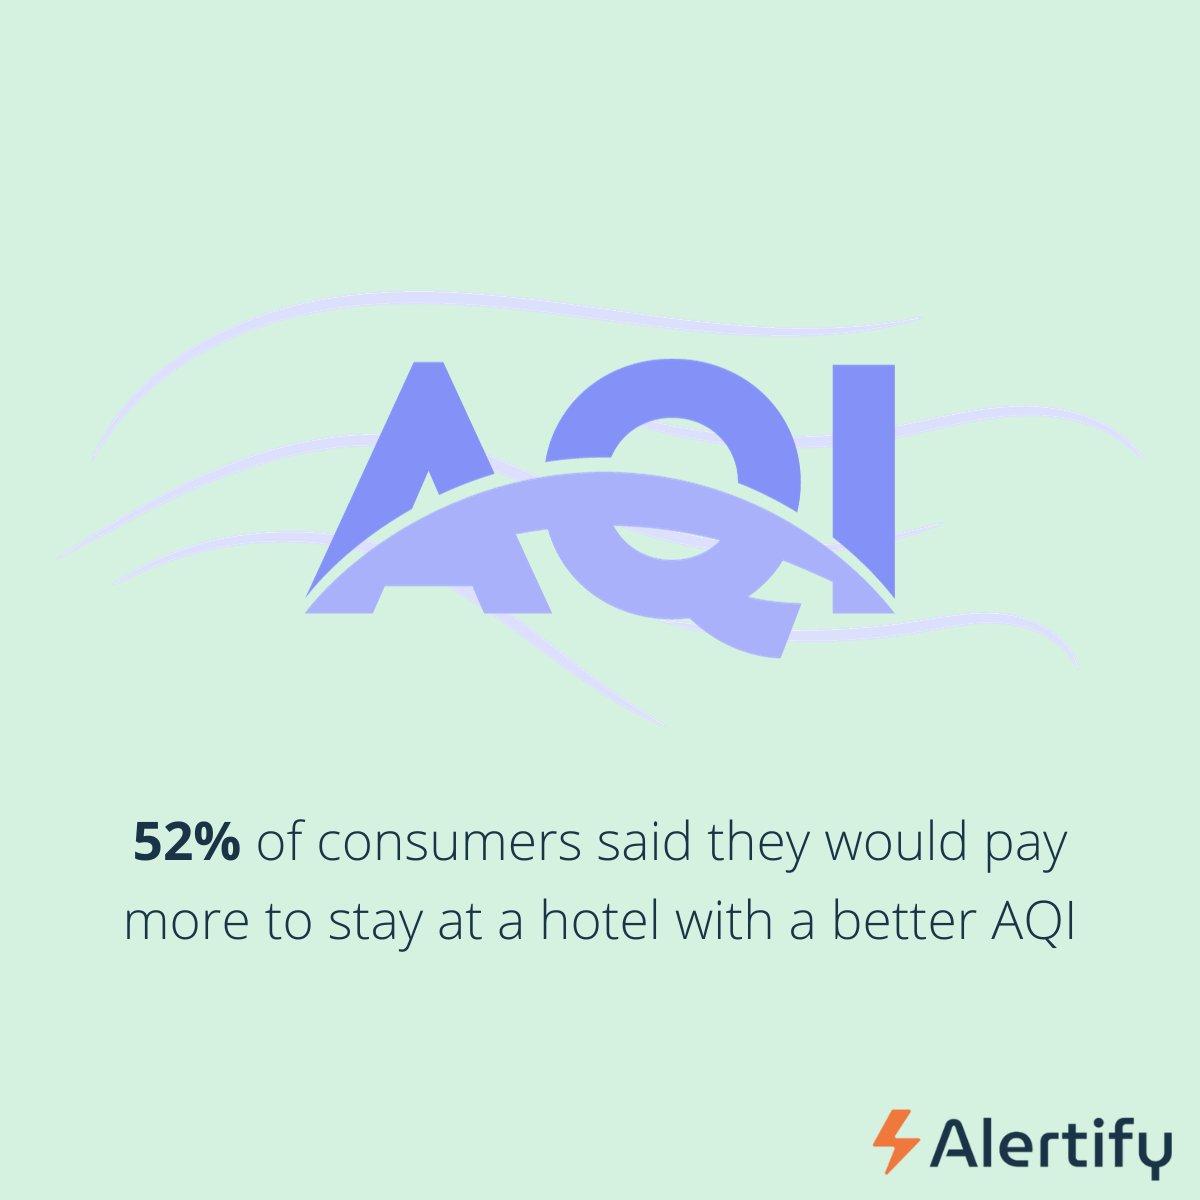 What is the air quality index (AQI) at your property? Most people don't know, yet 52% of consumers would pay more to stay at a hotel with a higher AQI. With Alertify, you can accurately measure AQI in real-time 

#AQI #AirQuality #AirQualityMonitor #DYK #Alertify #RoomMonitor